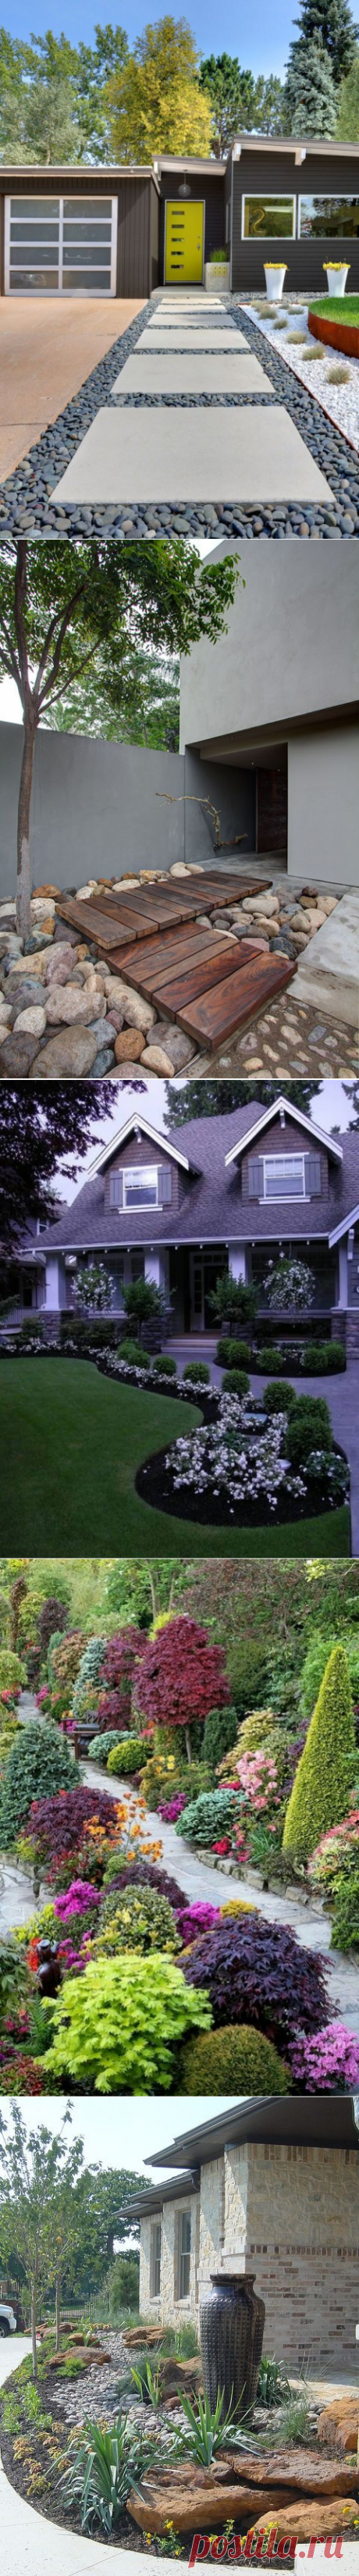 20+ Simple And Small Front Yard Landscaping Ideas (Low Maintenance)